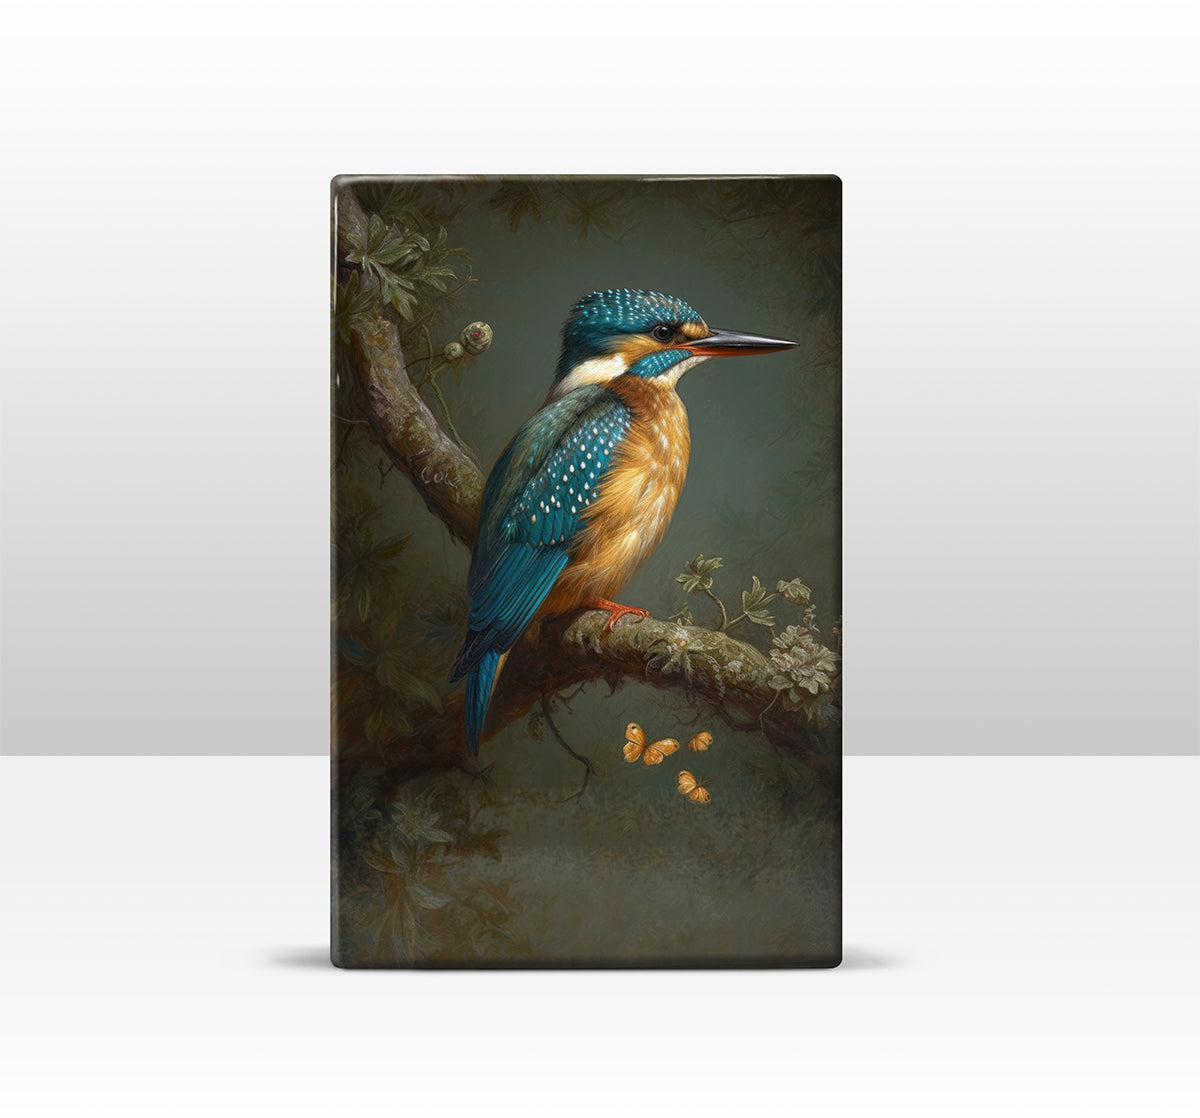 Laque print - Kingfisher with butterflies - Hand lacquered - 19.5 x 30 cm - LP373